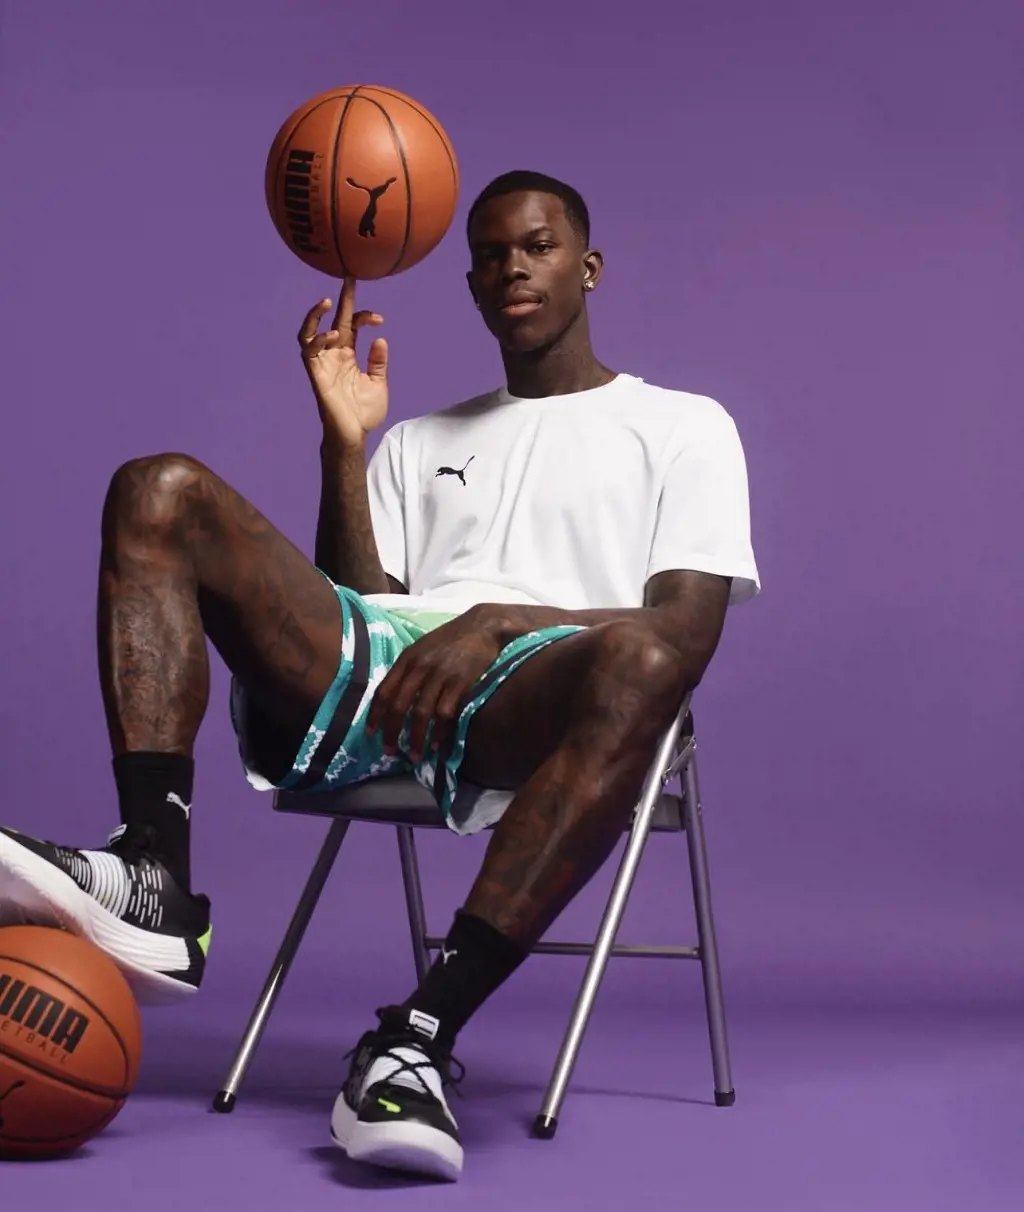 Schroder pictured with puma T-shirt, shoes and basketball after he signed an endorsement deal with the brand.